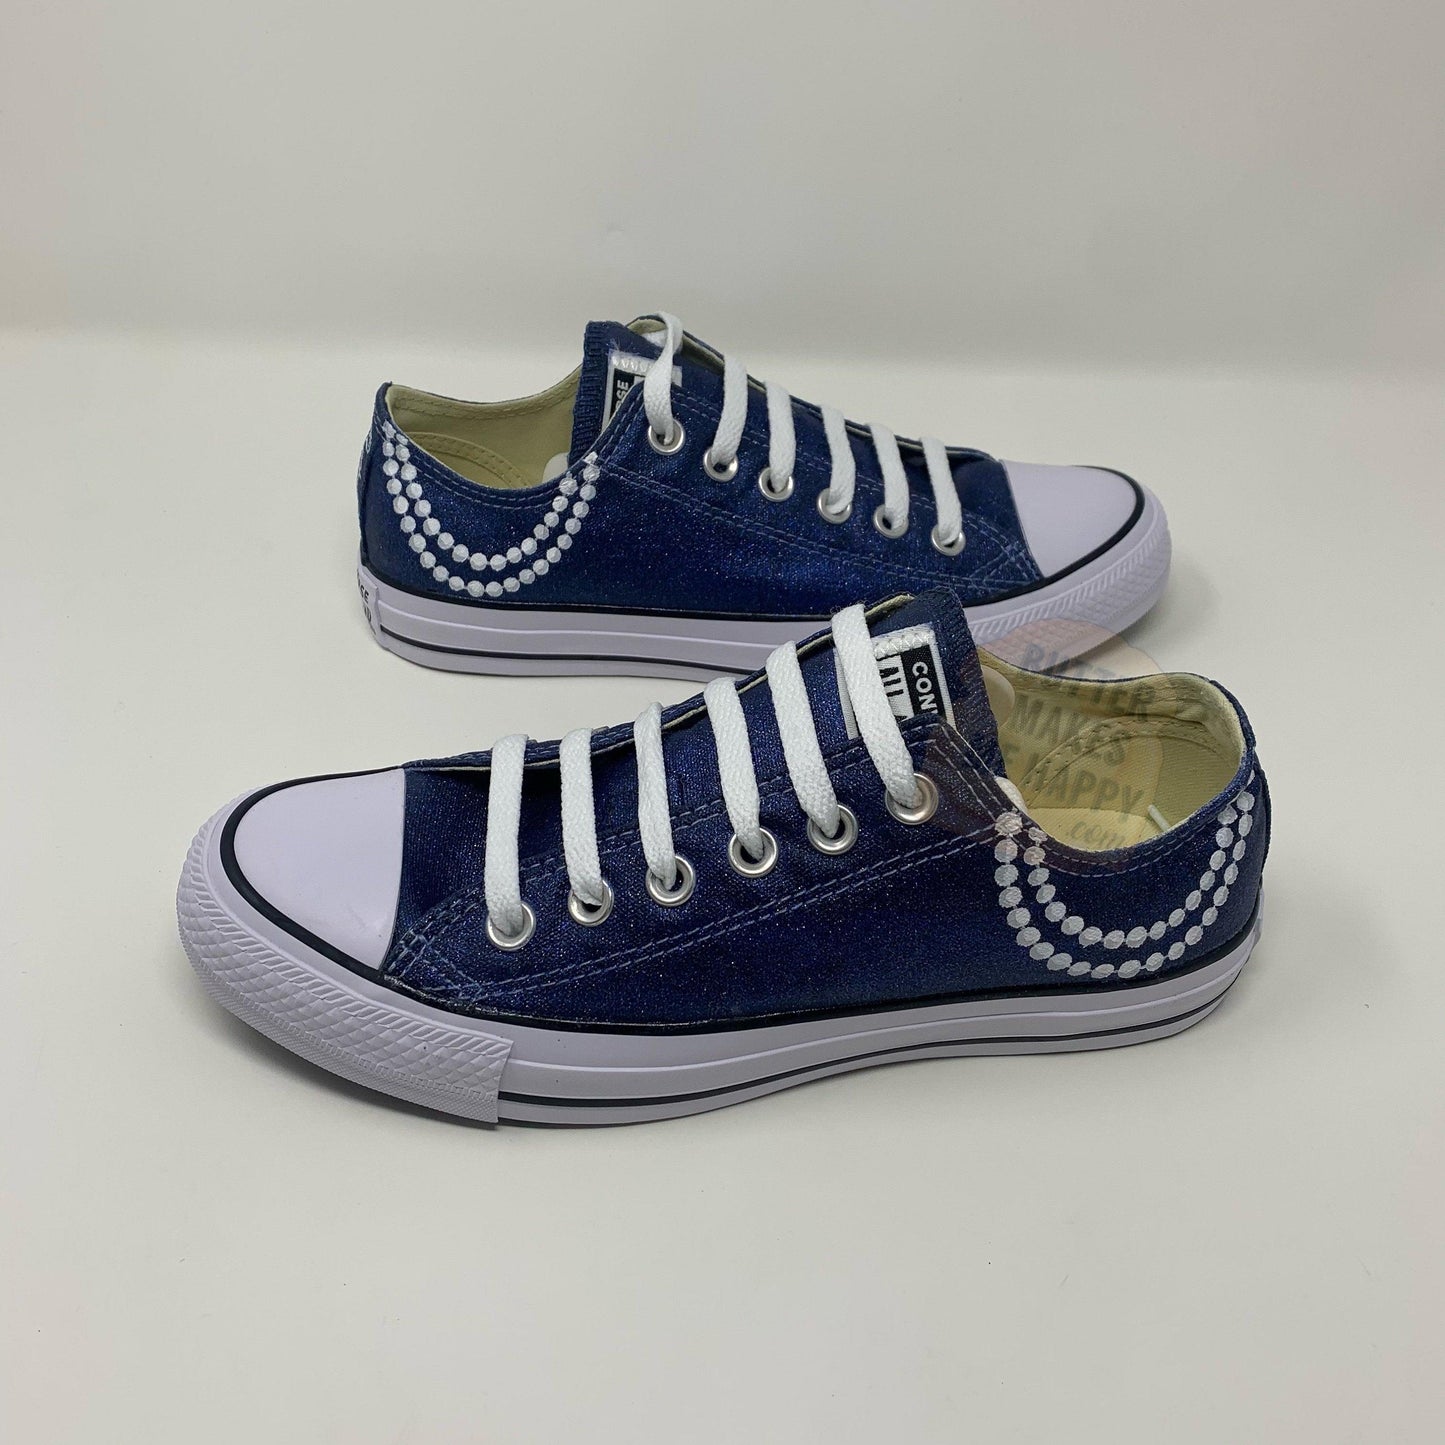 Chucks & Pearls Converse-Shoes-ButterMakesMeHappy